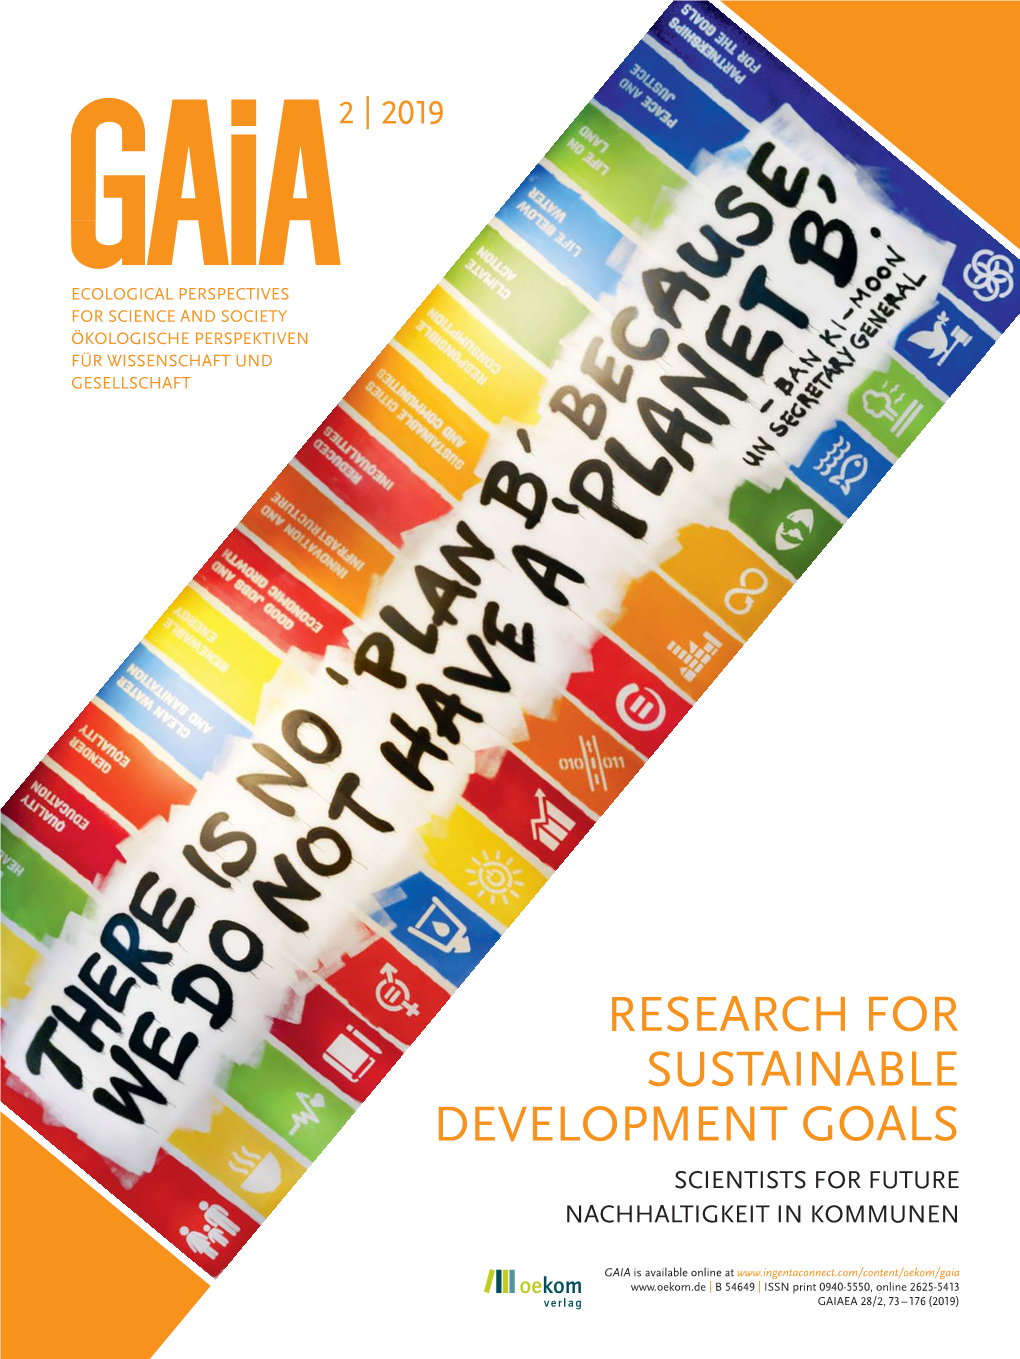 Research for Sustainable Development Goals